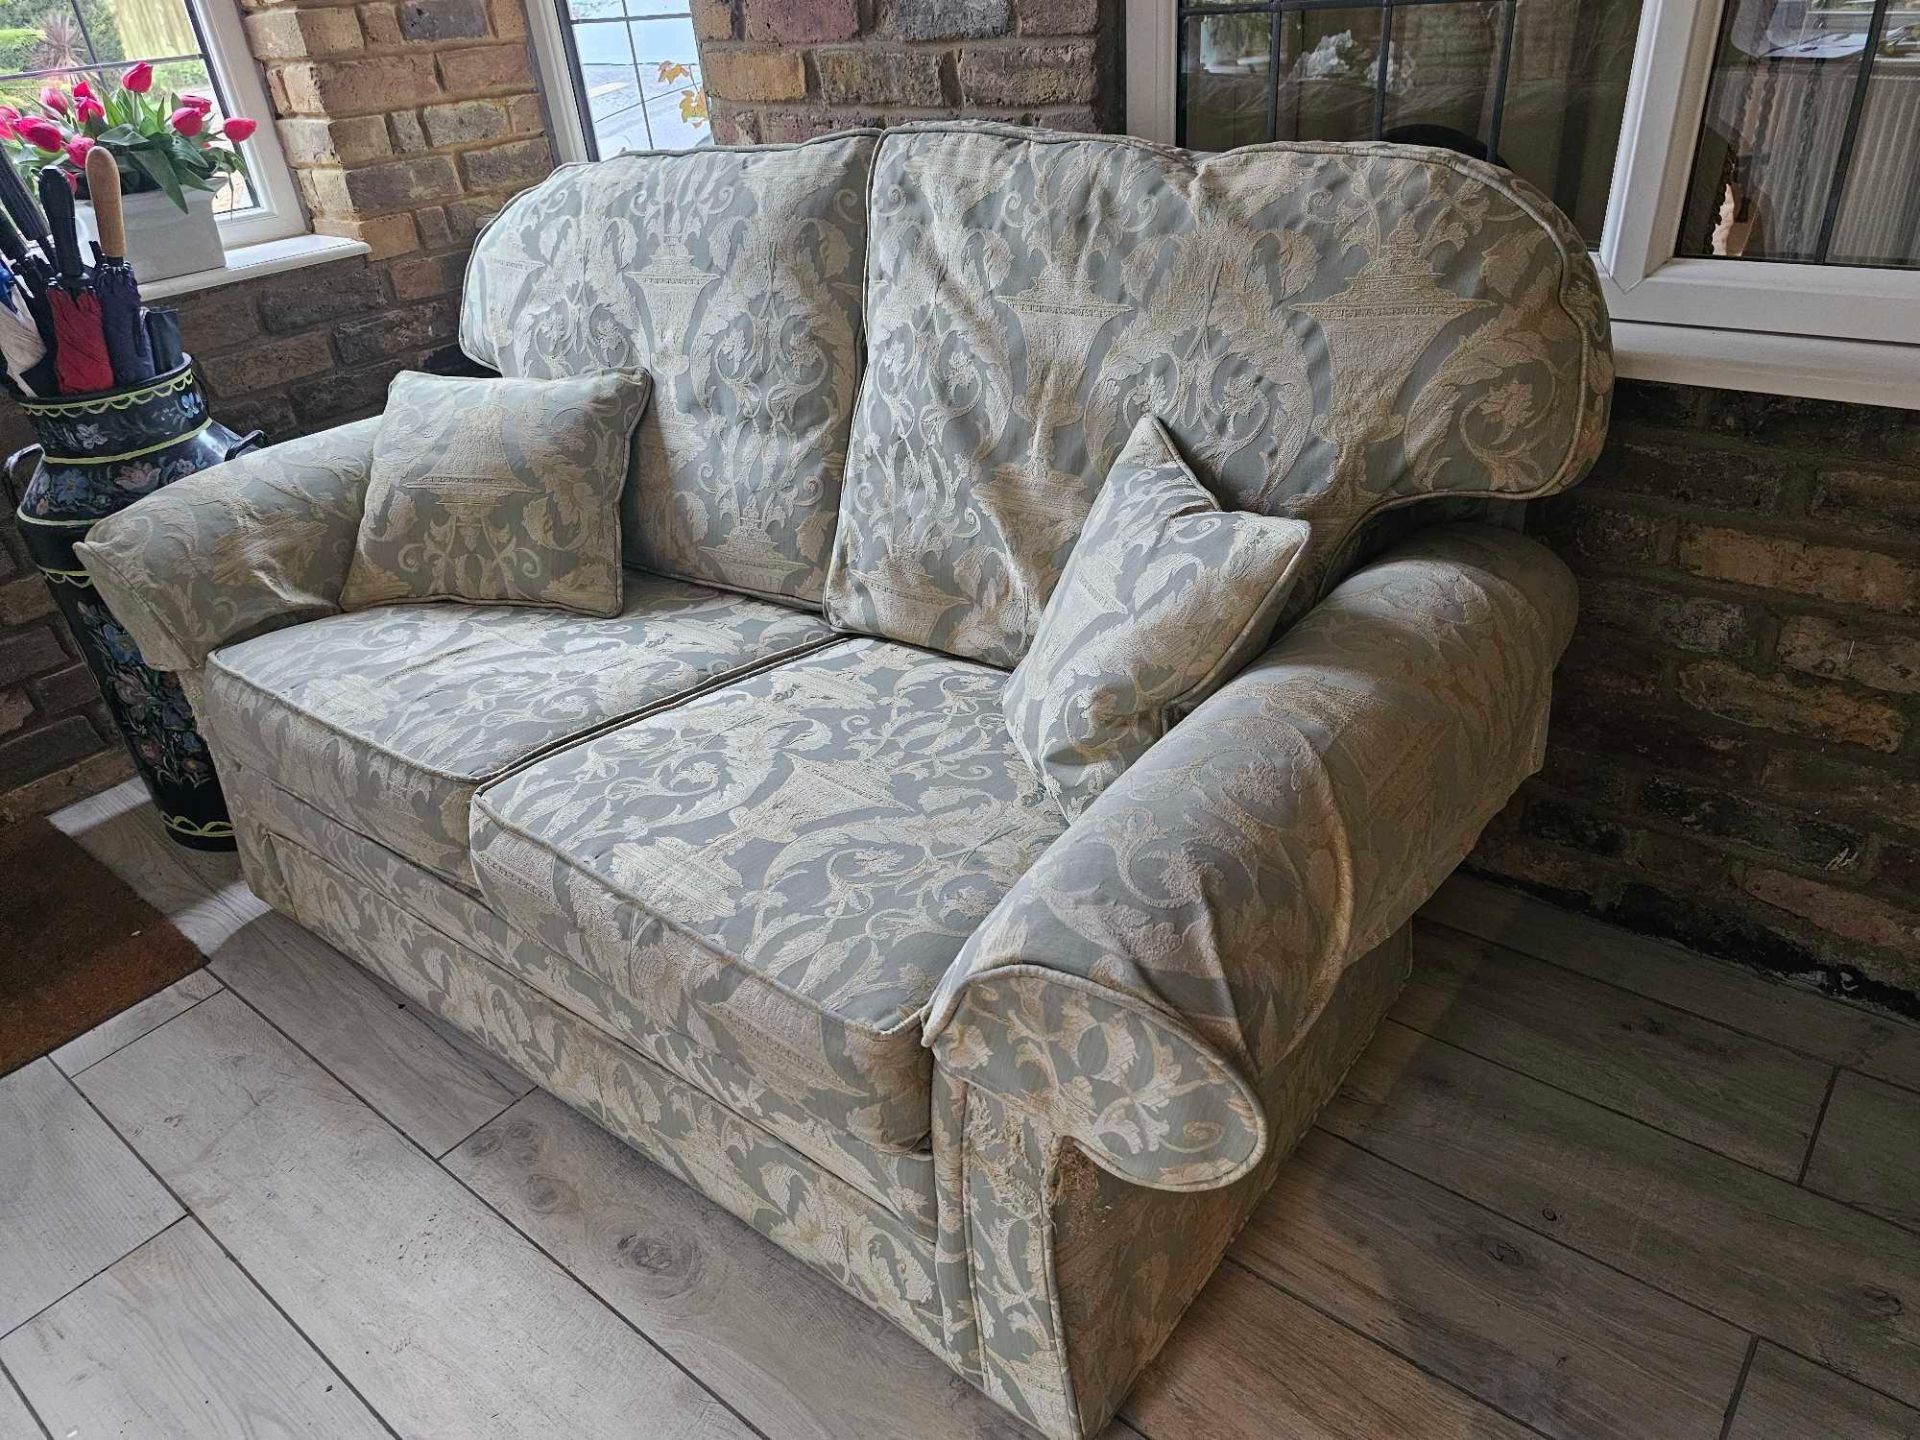 A Peter Guild Upholstered Two Seater Sofa In Damask Embossed Pattern Mint And Gold 160 X 87 X 95cm - Image 3 of 6